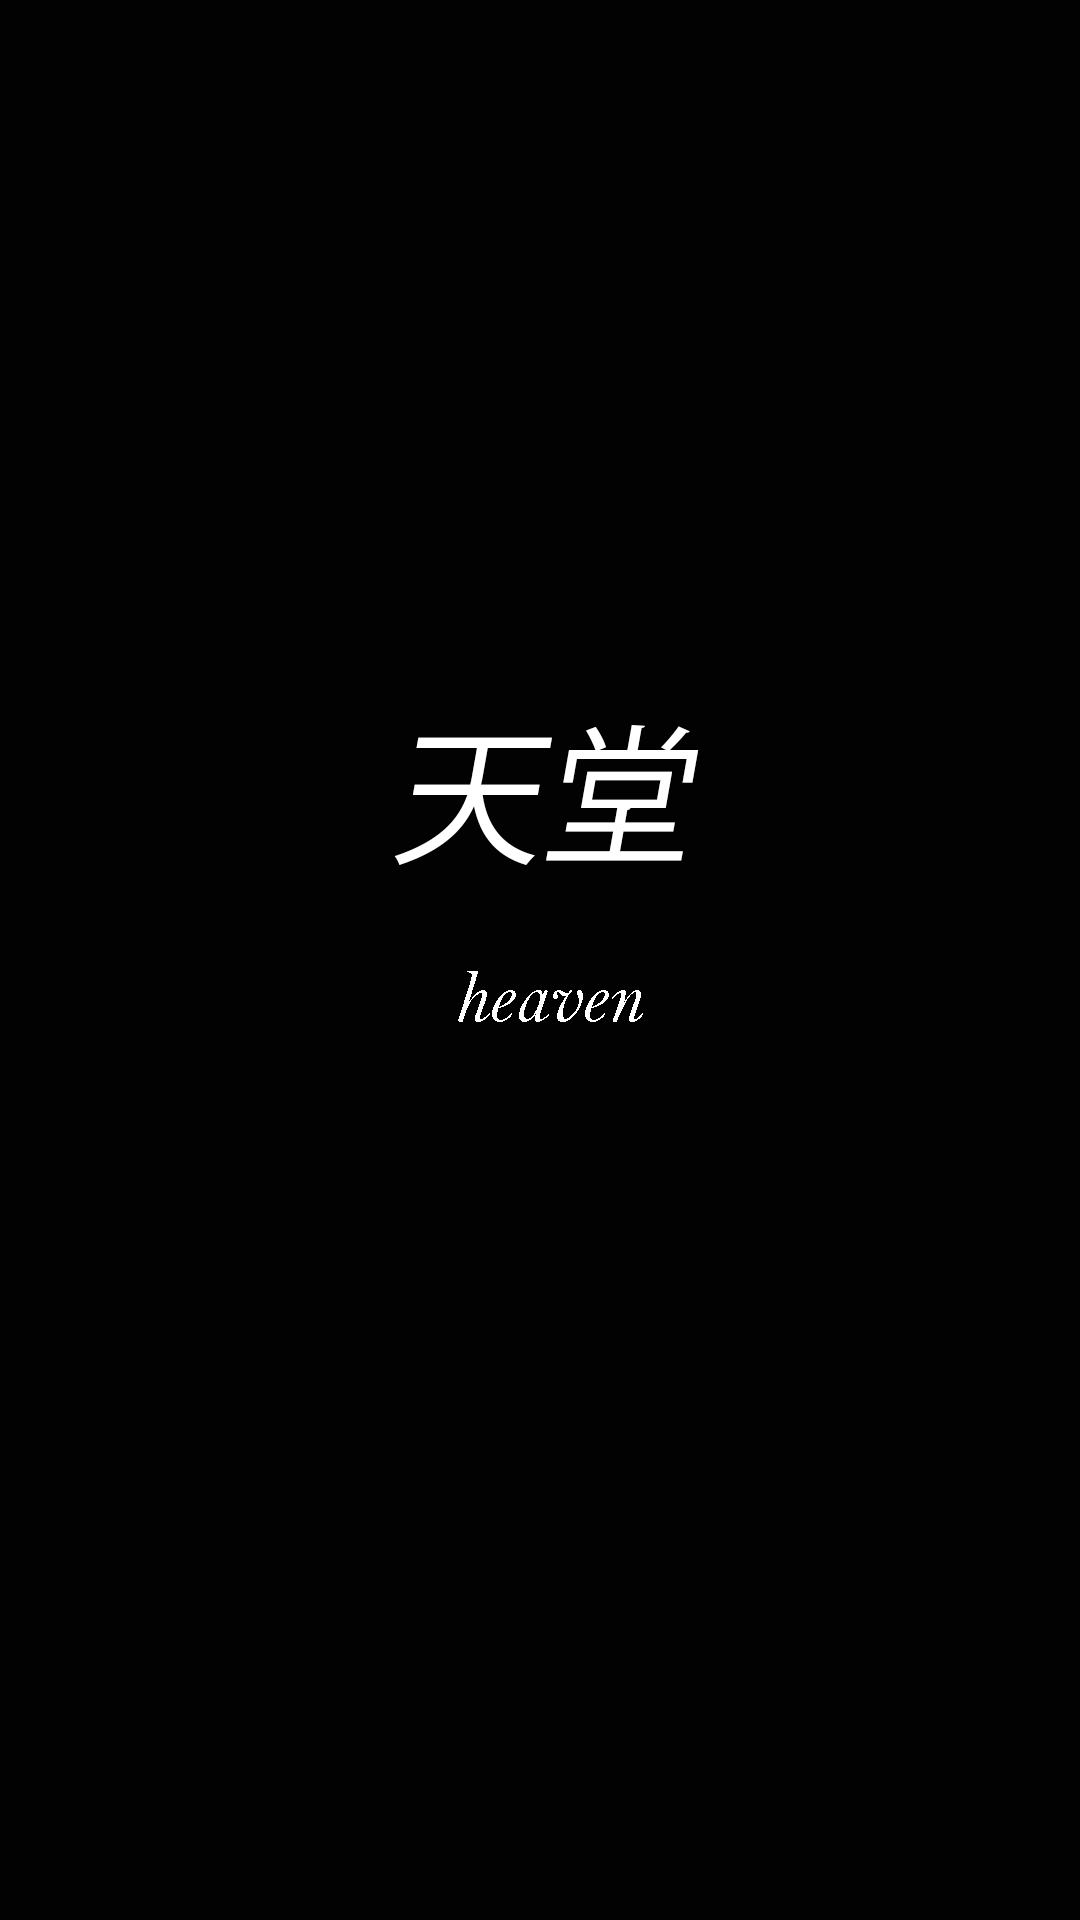 Lock Screens. Japanese quotes, Japanese words, Words wallpaper